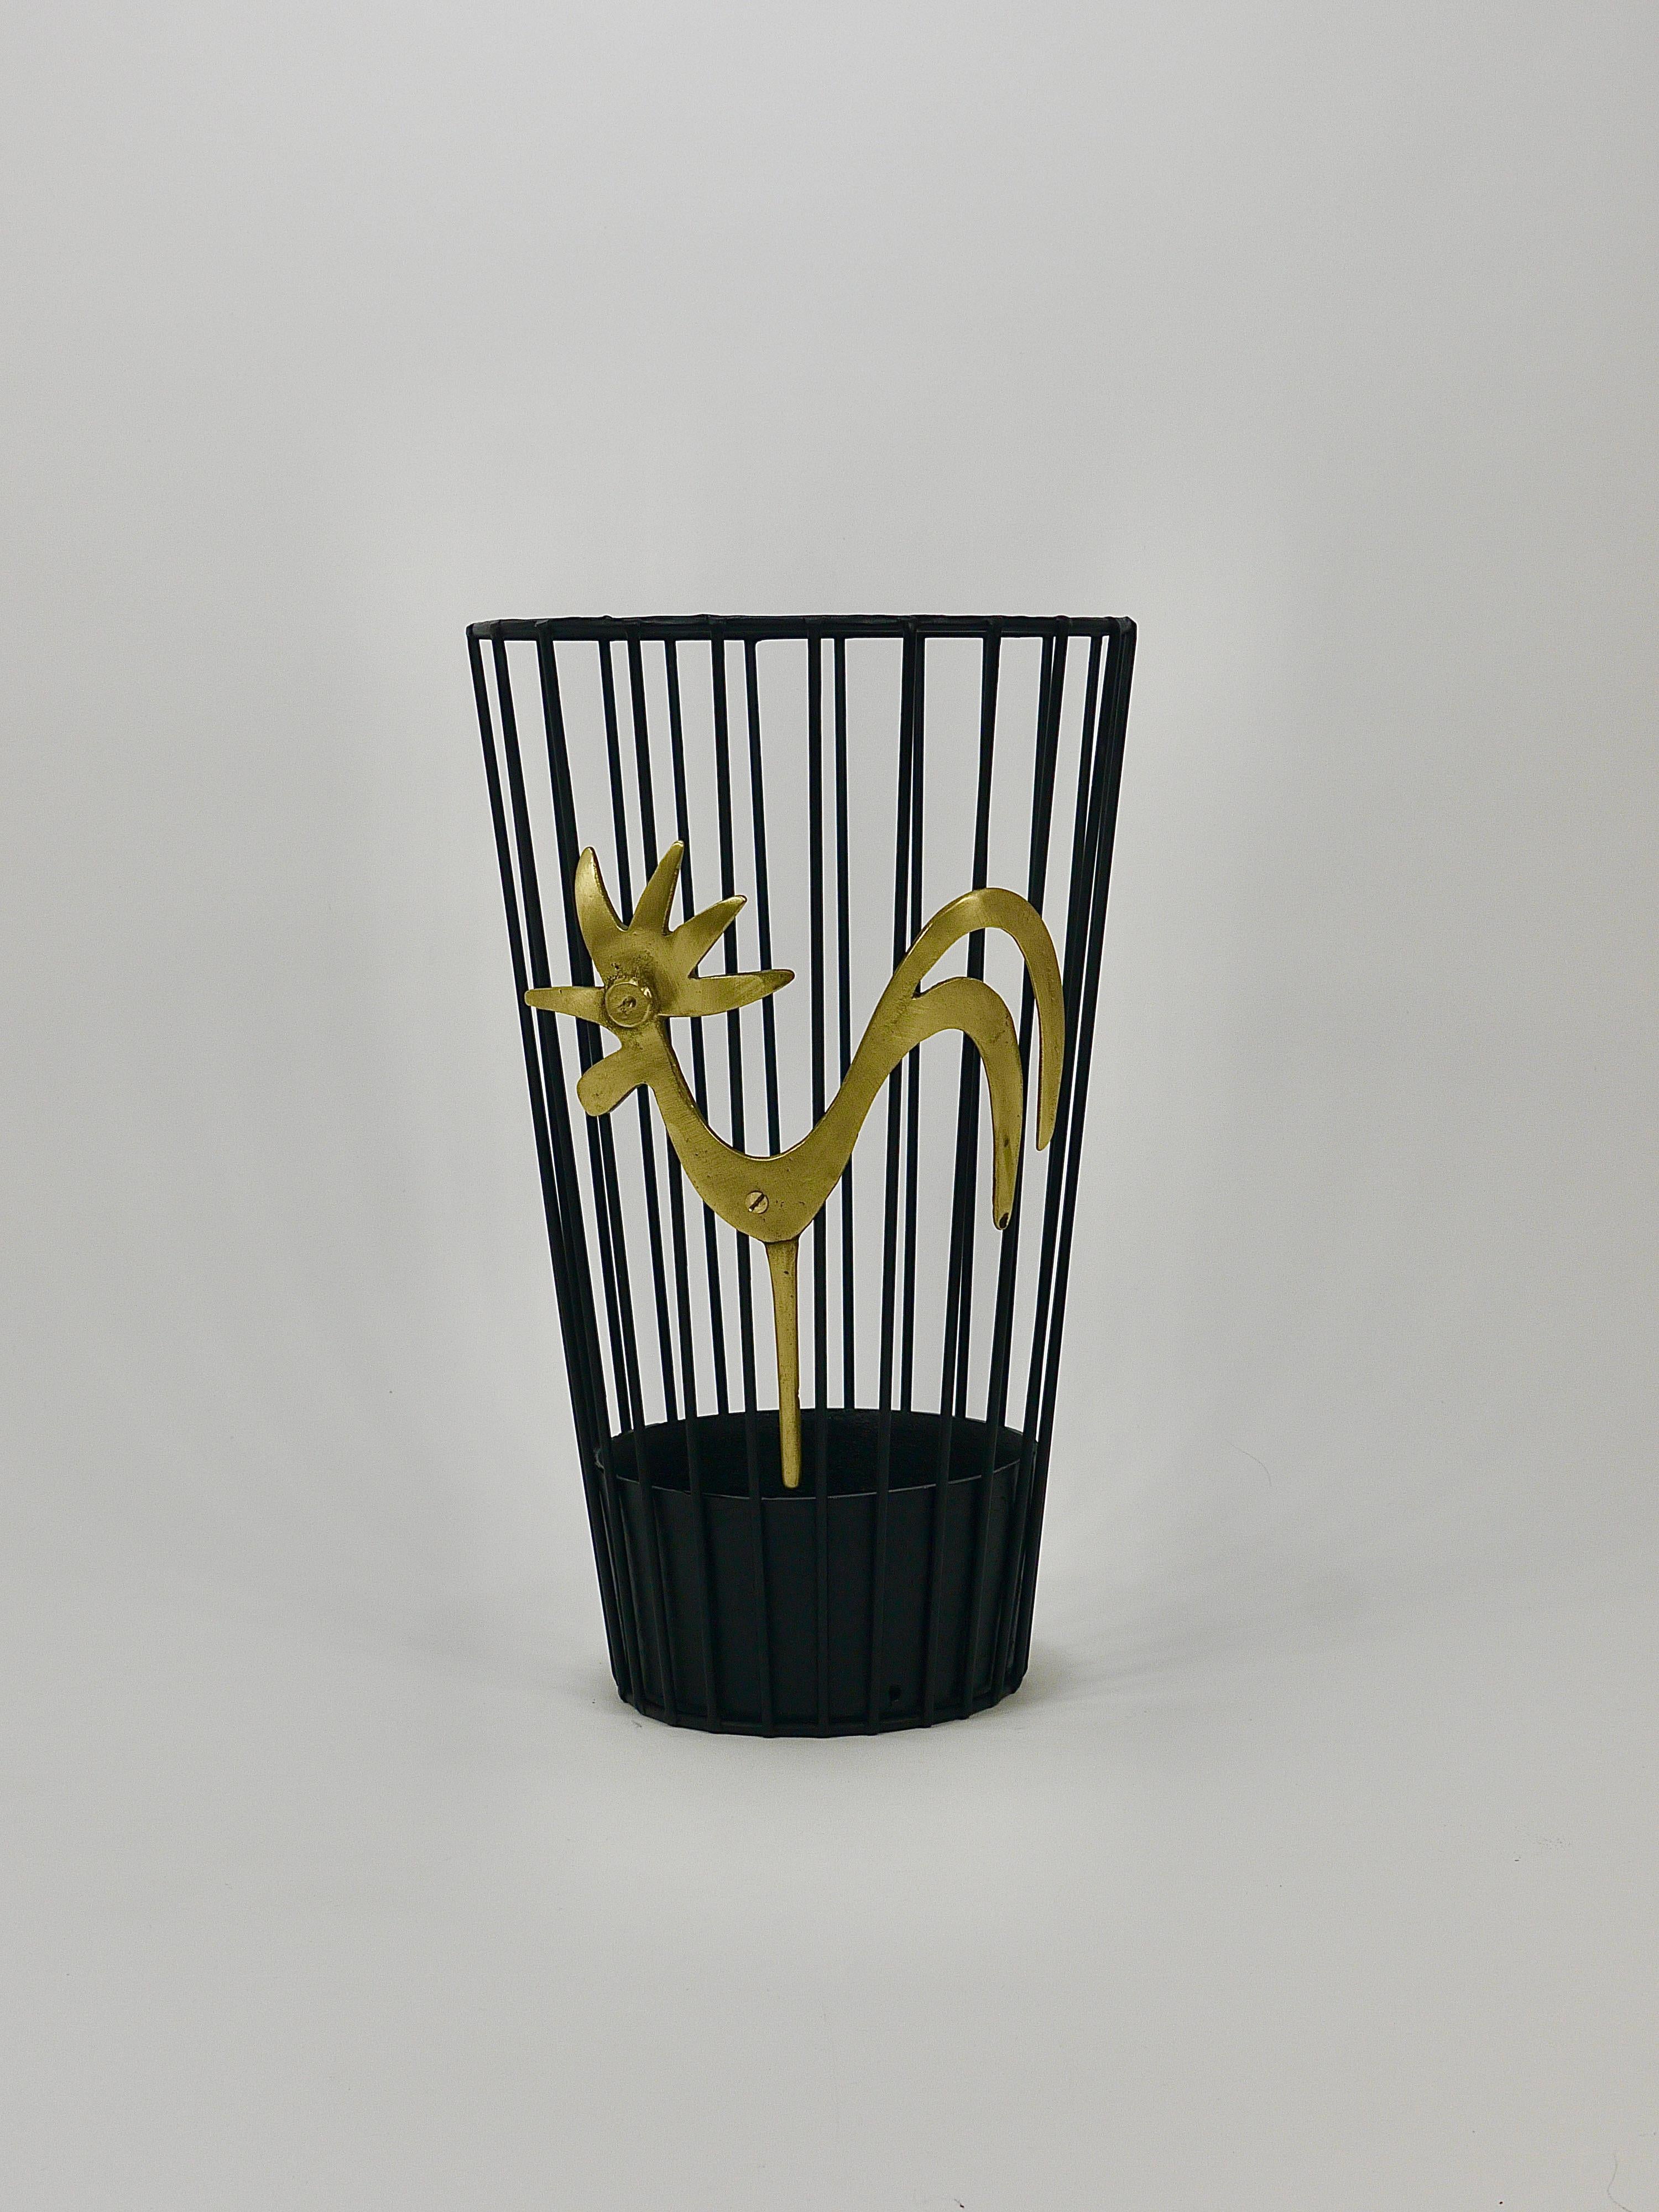 Blackened Walter Bosse Brass Rooster Mid-Century Umbrella Stand for Herta Baller, 1950s For Sale